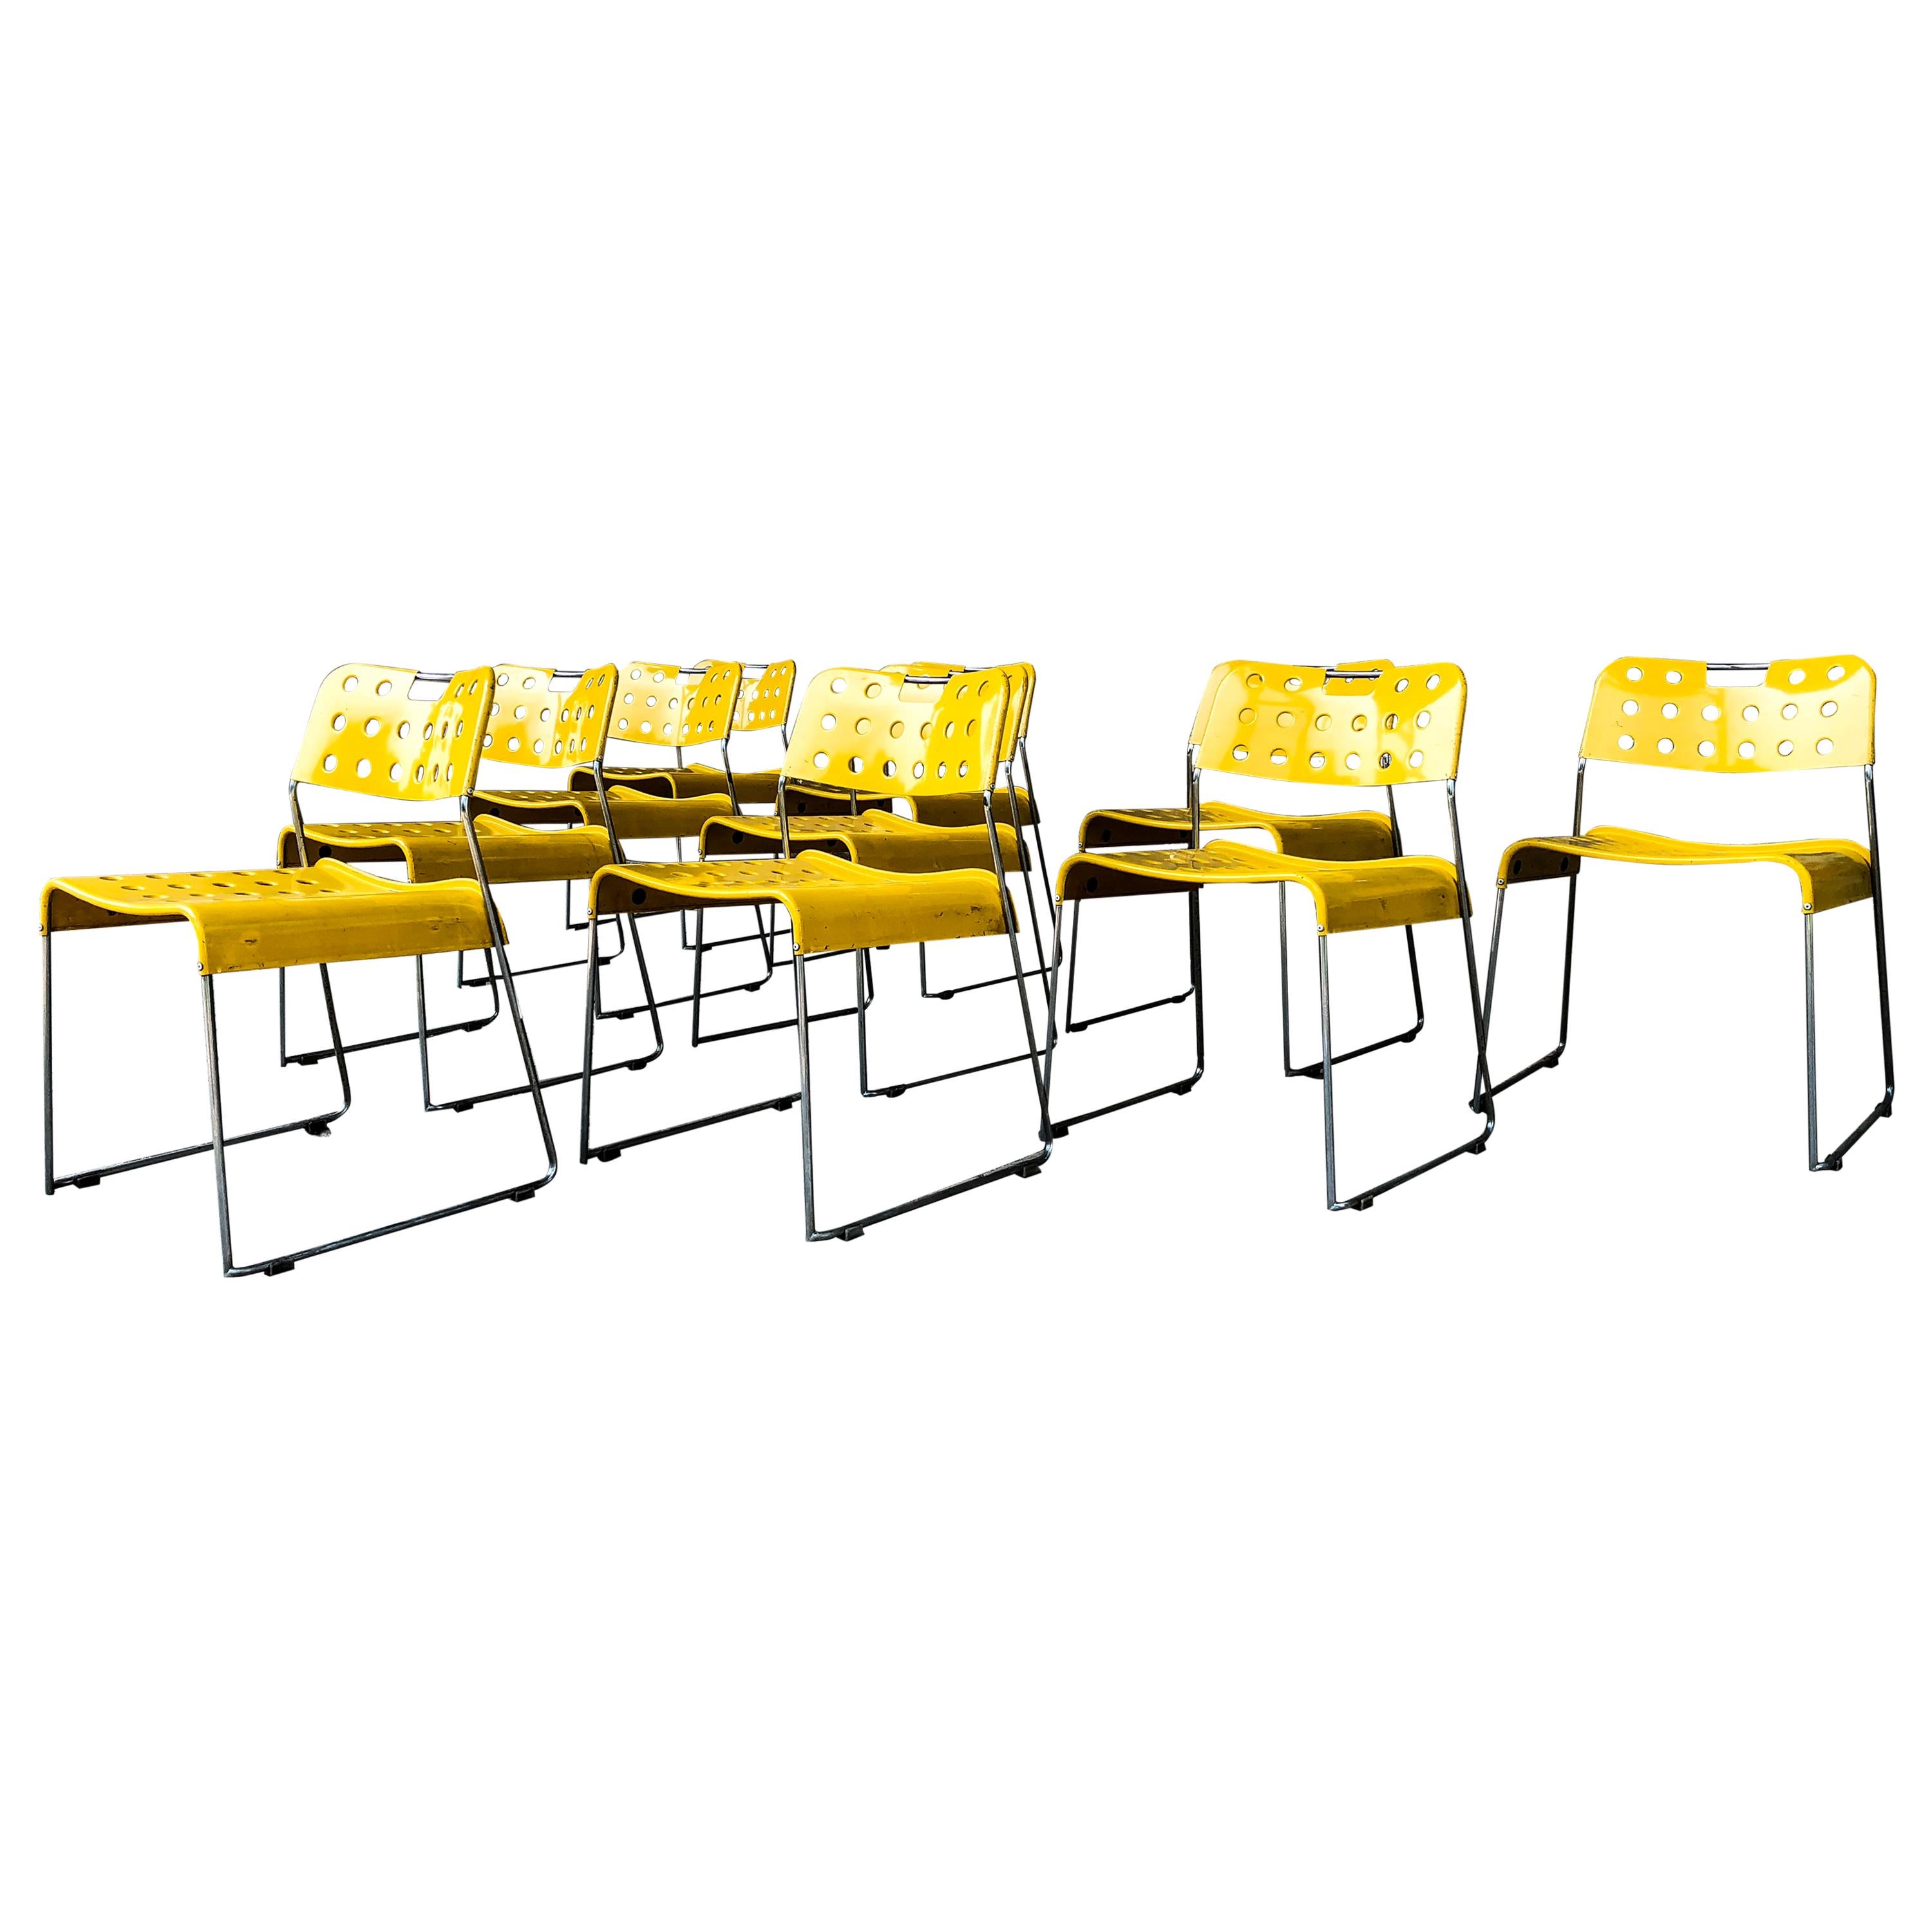 Rodney Kinsman Space Age Yellow Omstak Chair for Bieffeplast, 1971, Set of 6 For Sale 3